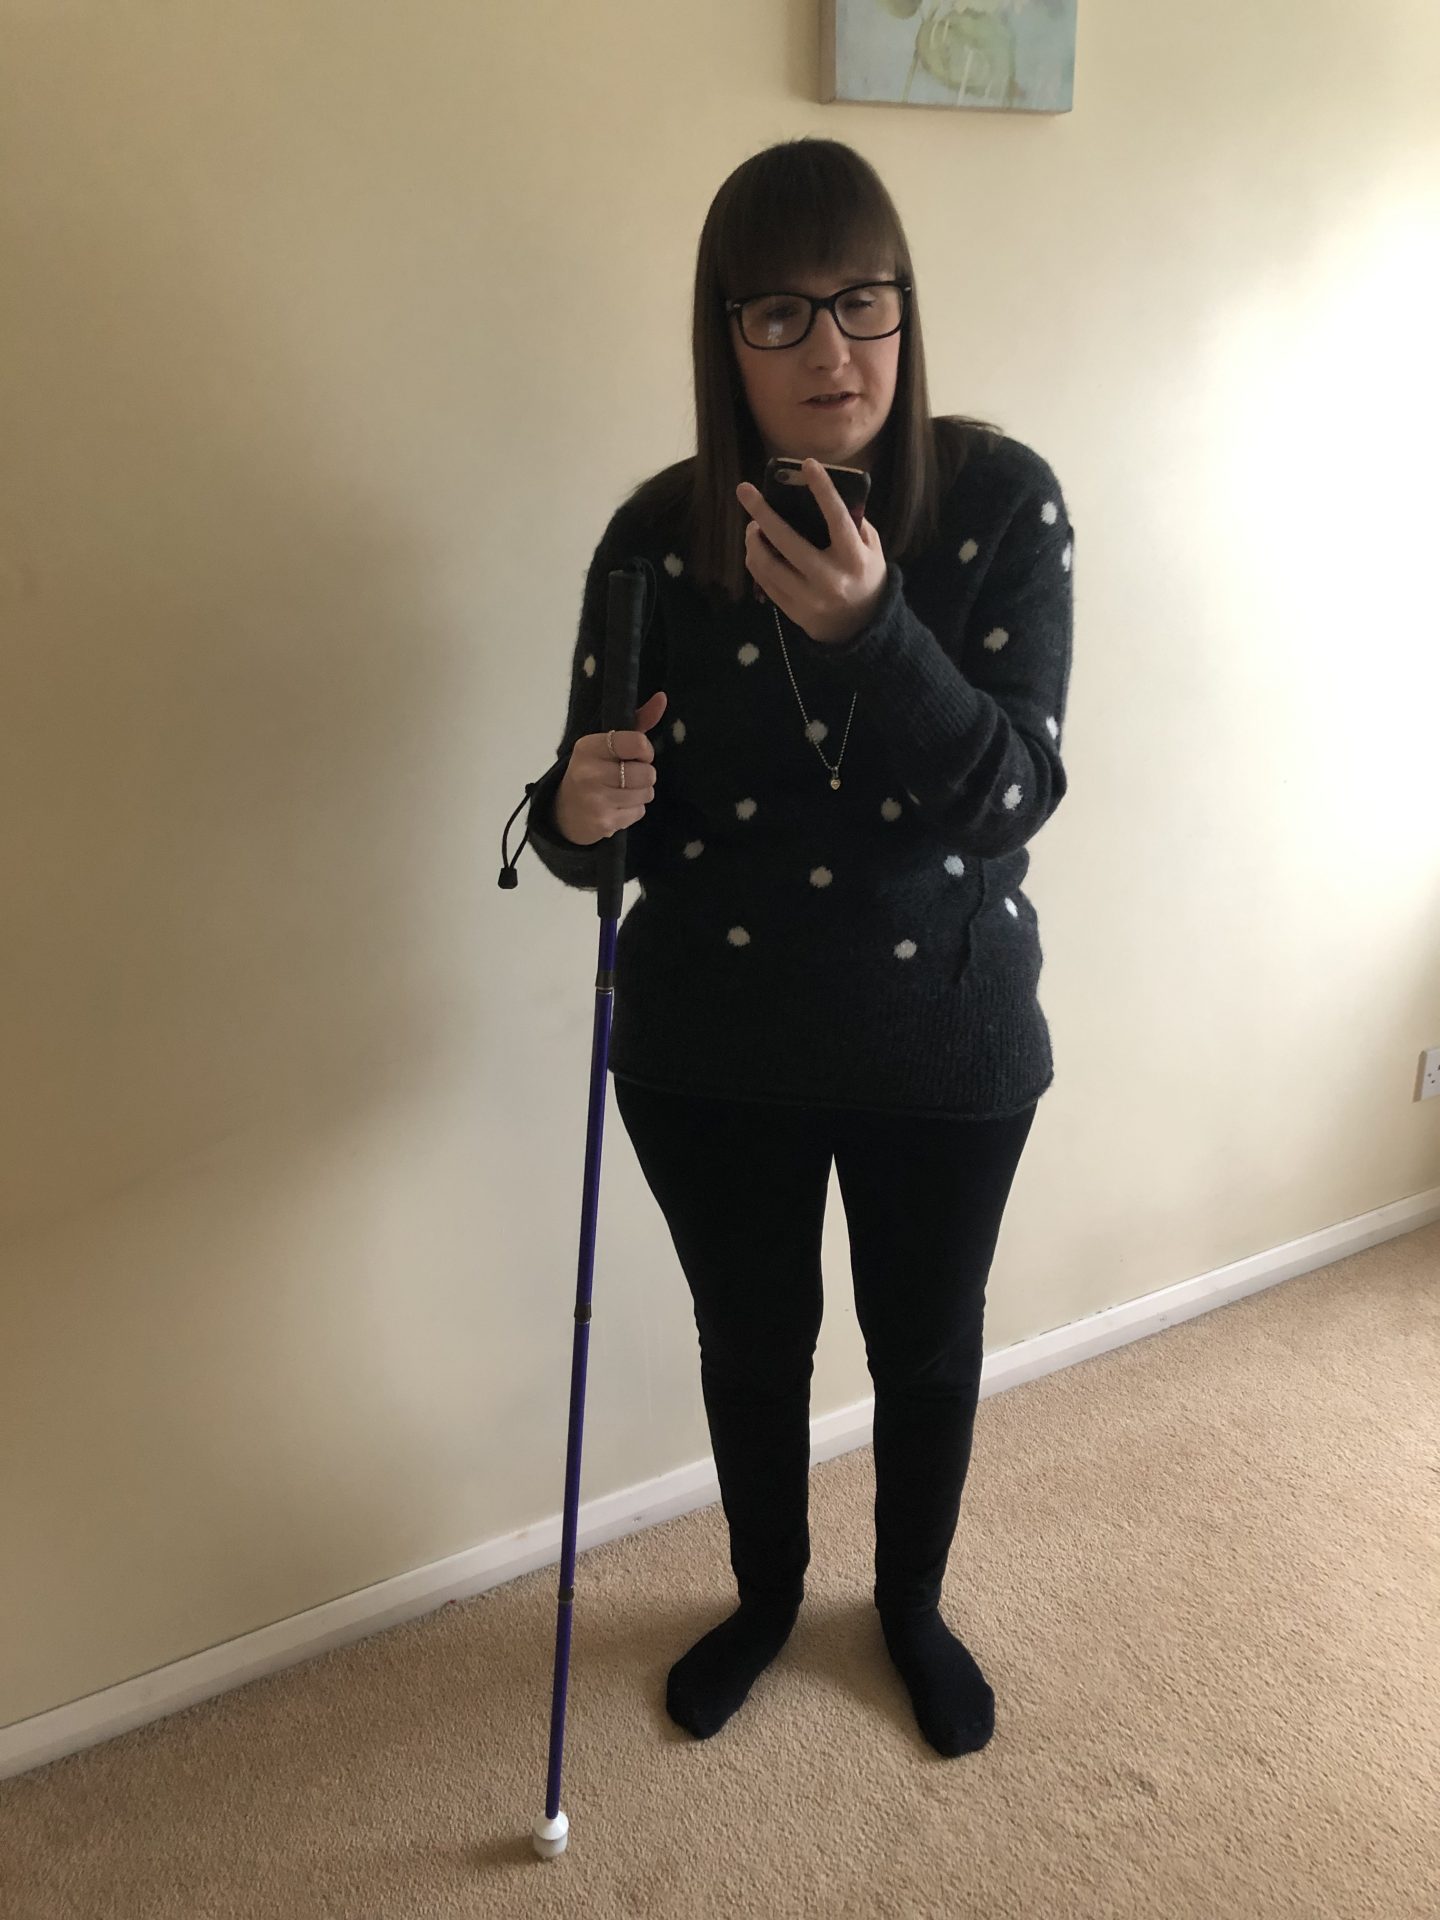 A photo of Holly holding her purple cane and looking at her phone. Her phone is in her left hand and her cane is in her right hand.